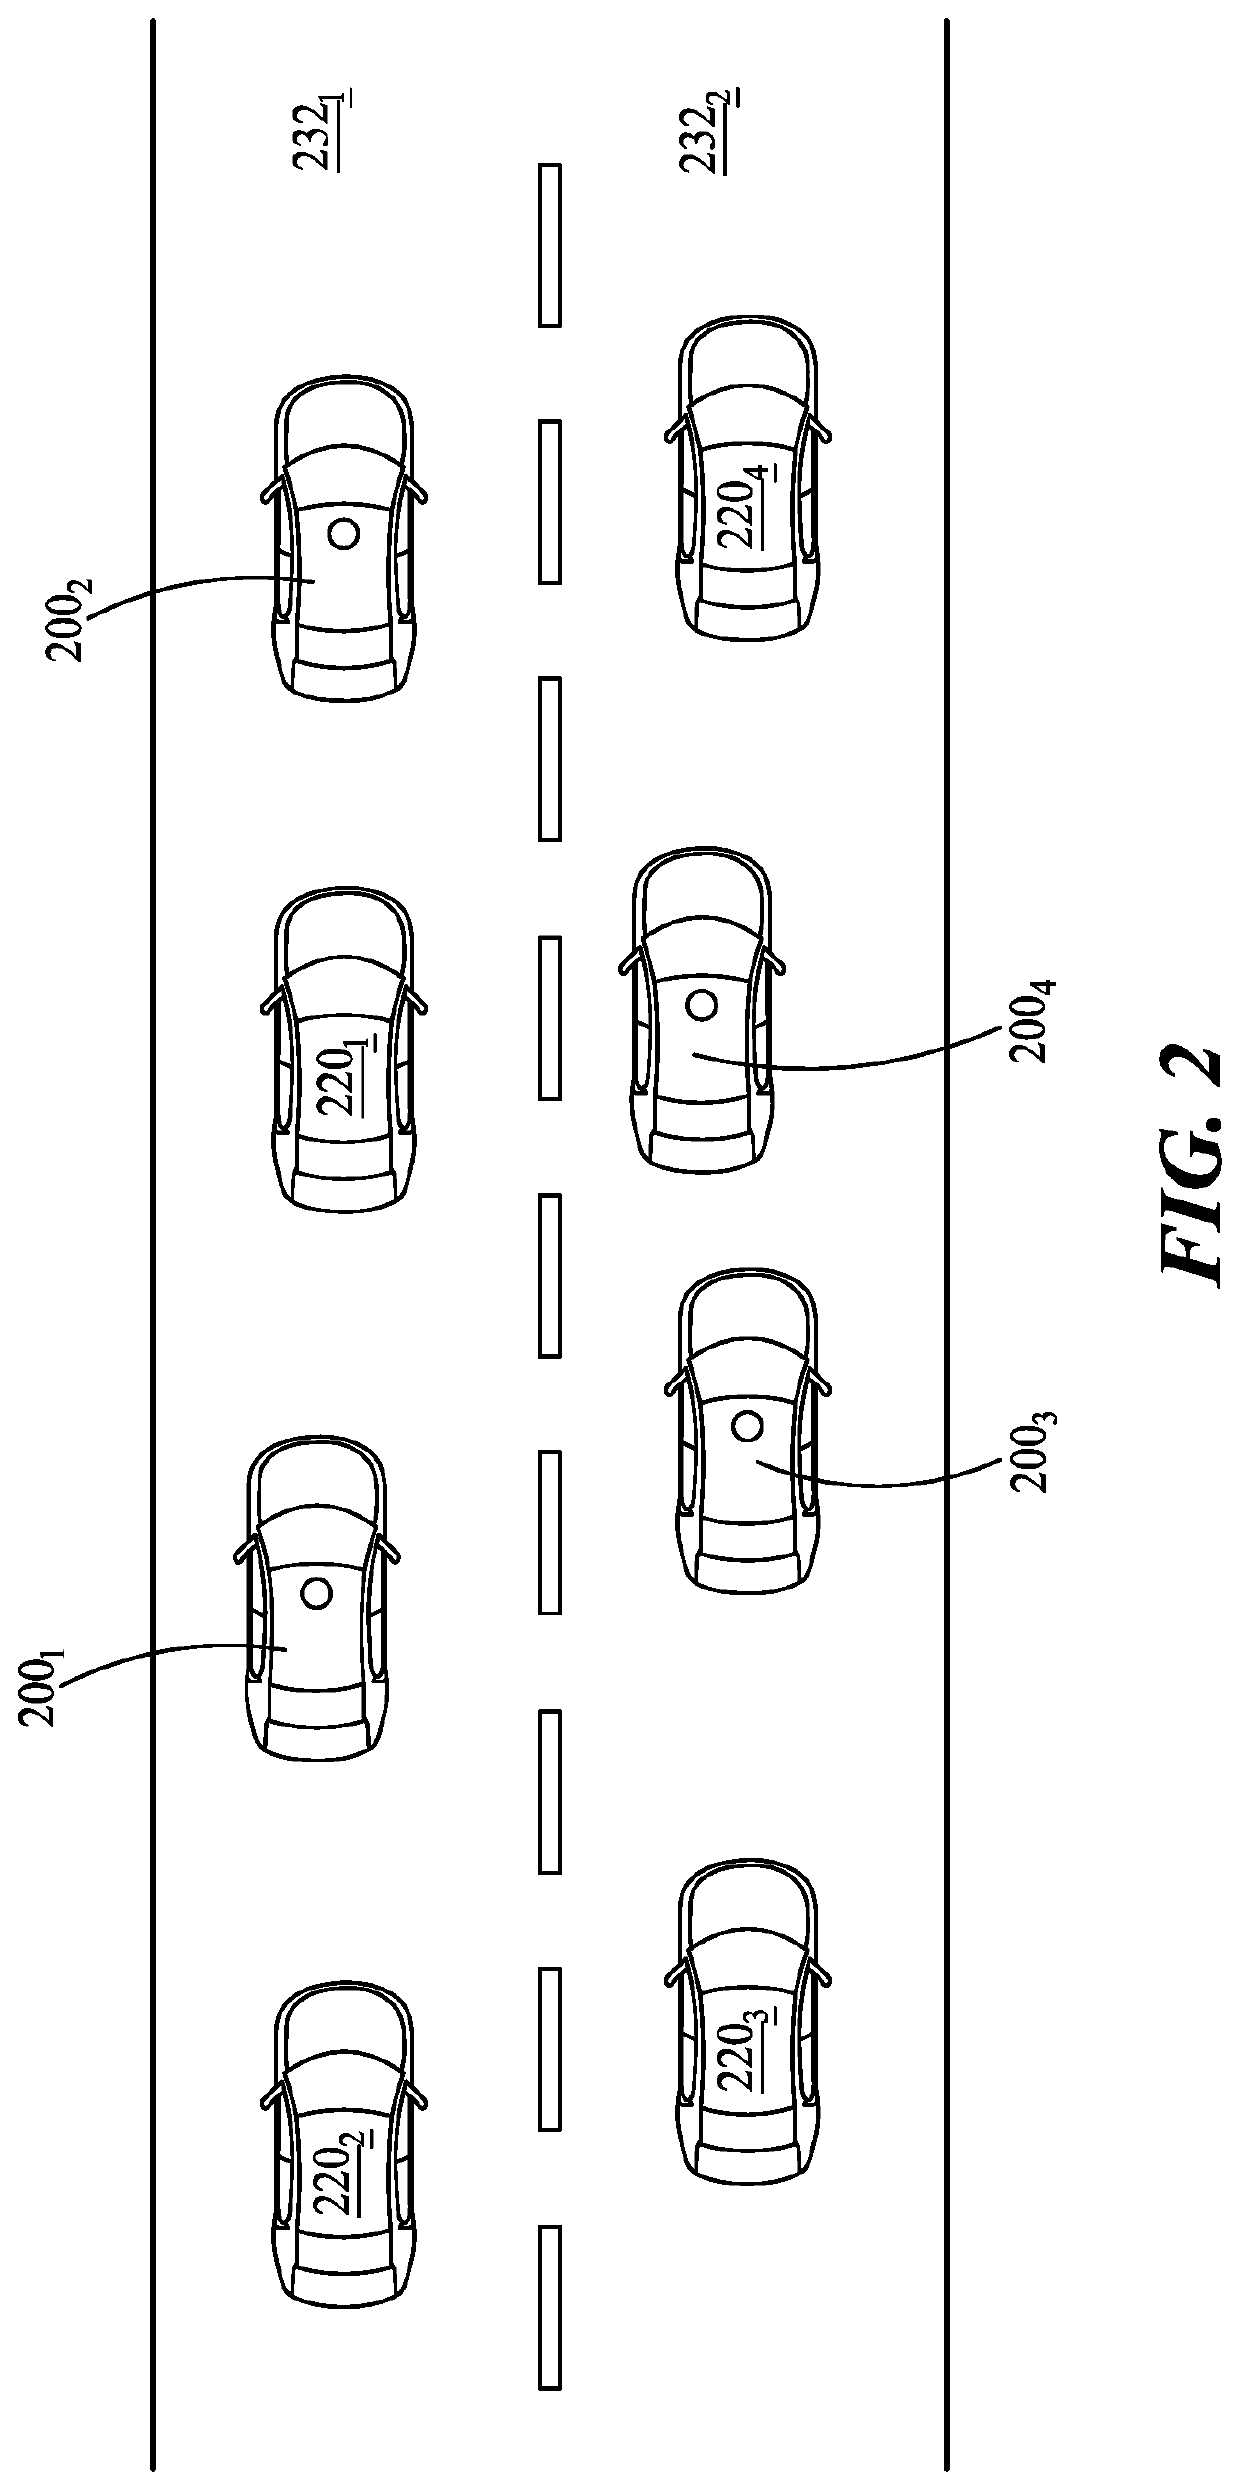 External communication suppression device for driving automation